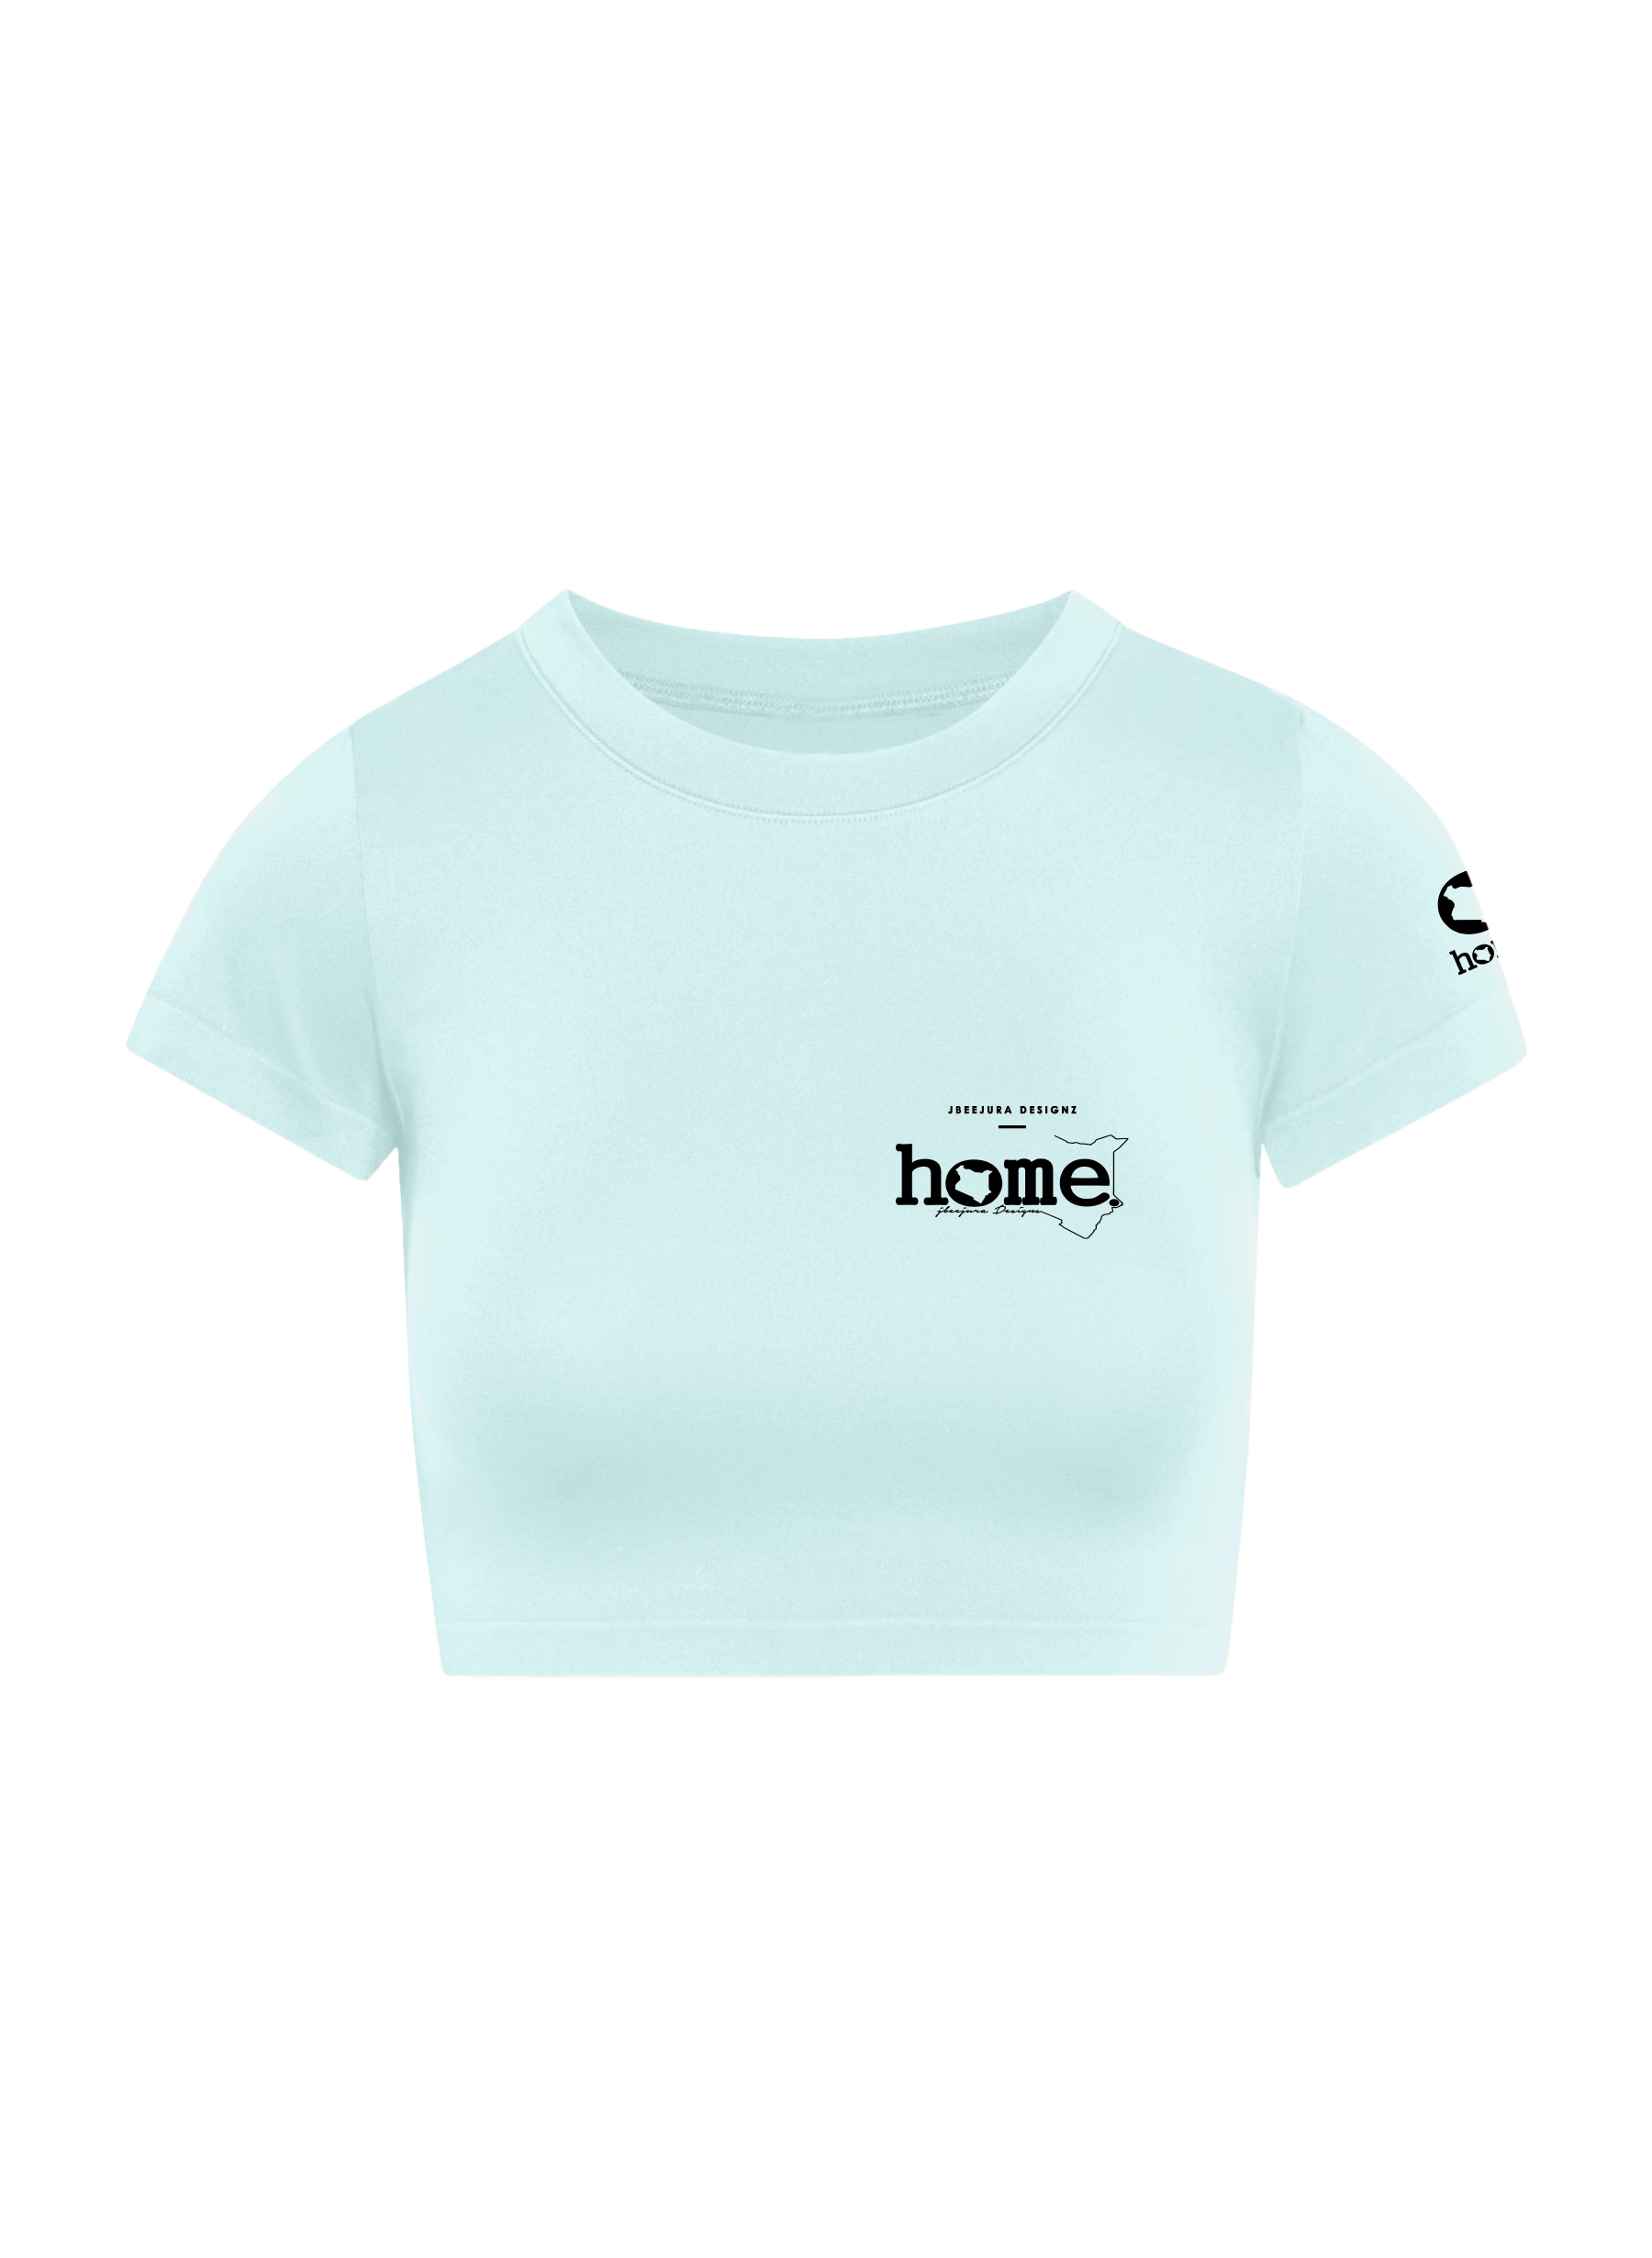 home_254 SHORT SLEEVED MISTY BLUE CROPPED ARIA TEE WITH A BLACK 3D WORDS PRINT – COTTON PLUS FABRIC